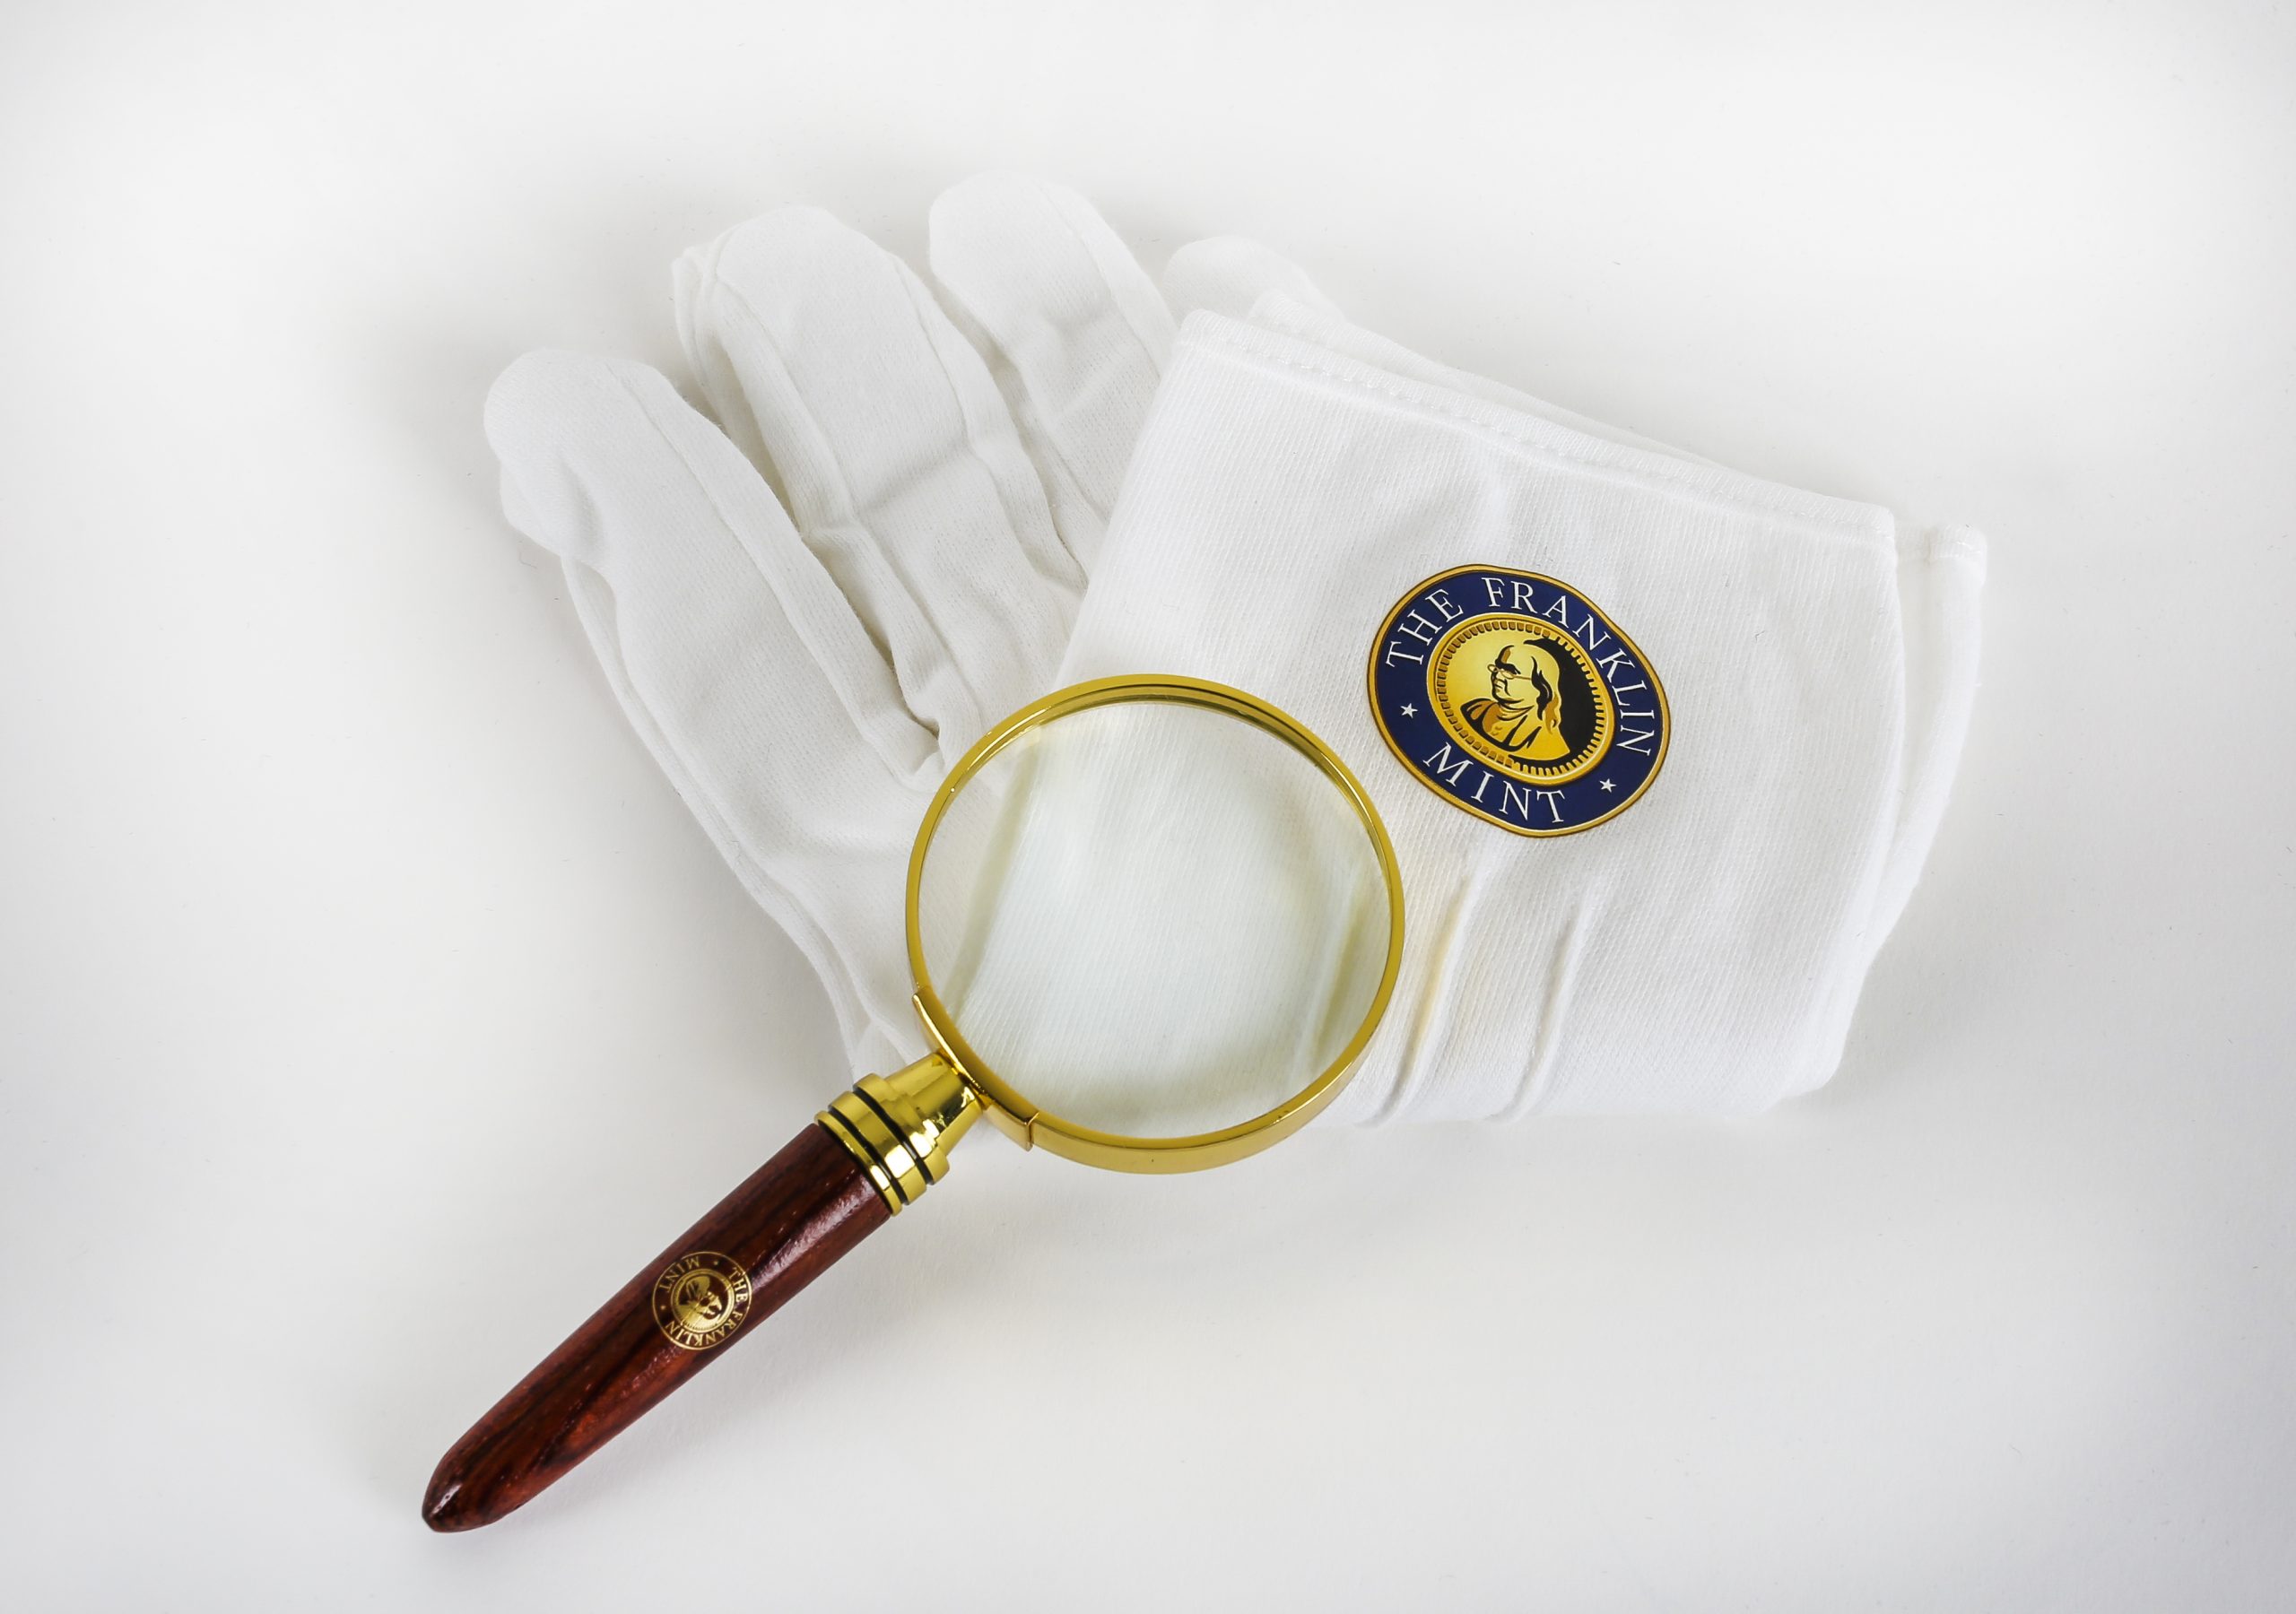 White Franklin Mint gloves with a large magnifying glass